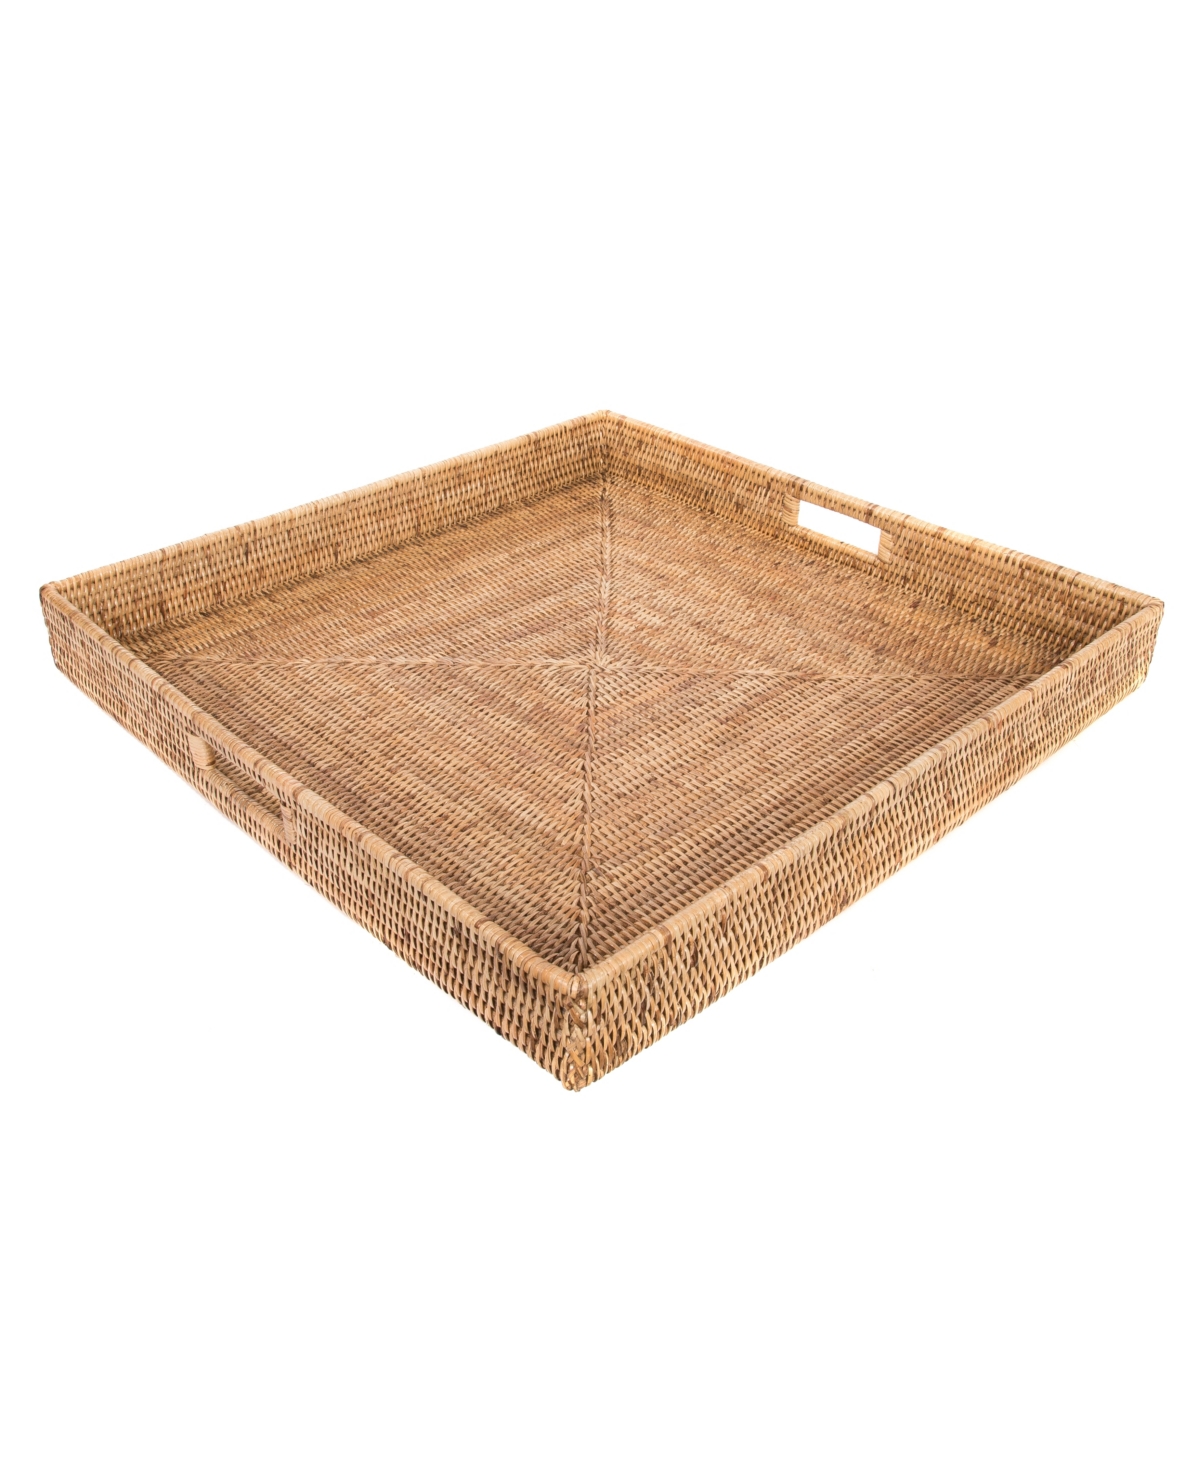 Artifacts Trading Company Artifacts Rattan Square Ottoman Tray In Honey Brown